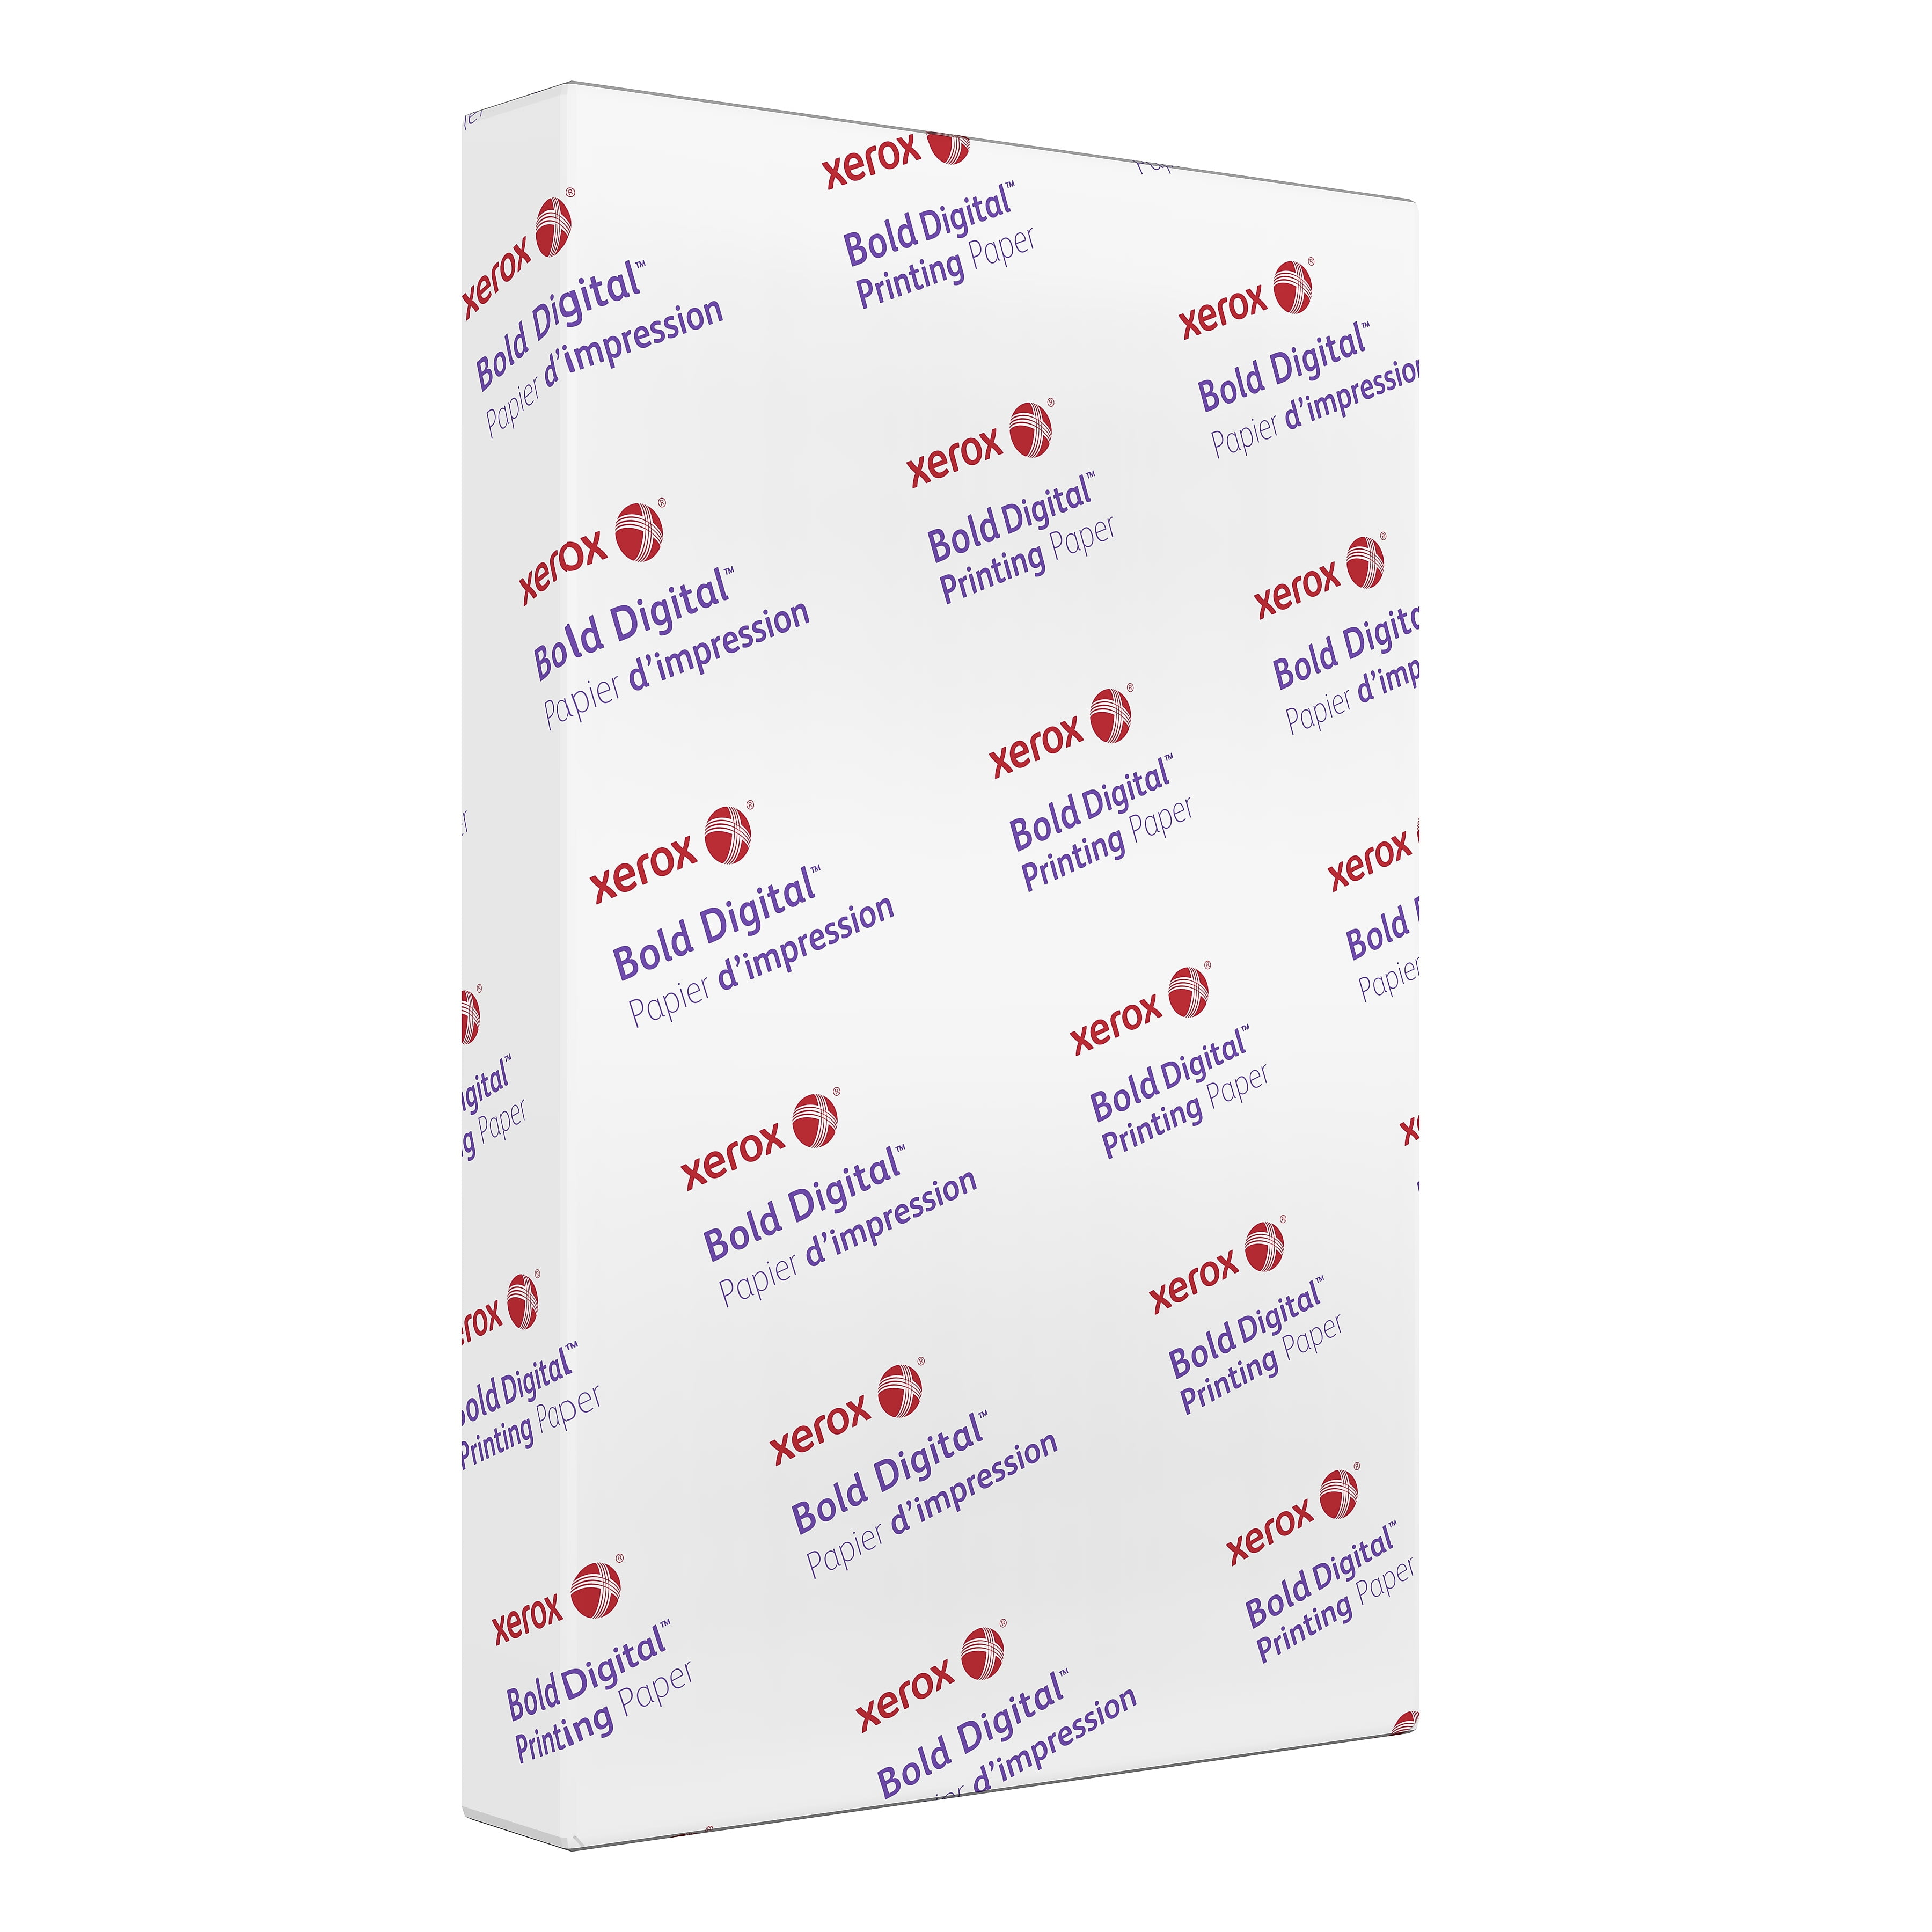 Xerox Bold Digital Paper 11x17 24lb/90g 500/pkg, Paper, Envelopes,  Cardstock & Wide format, Quick shipping nationwide